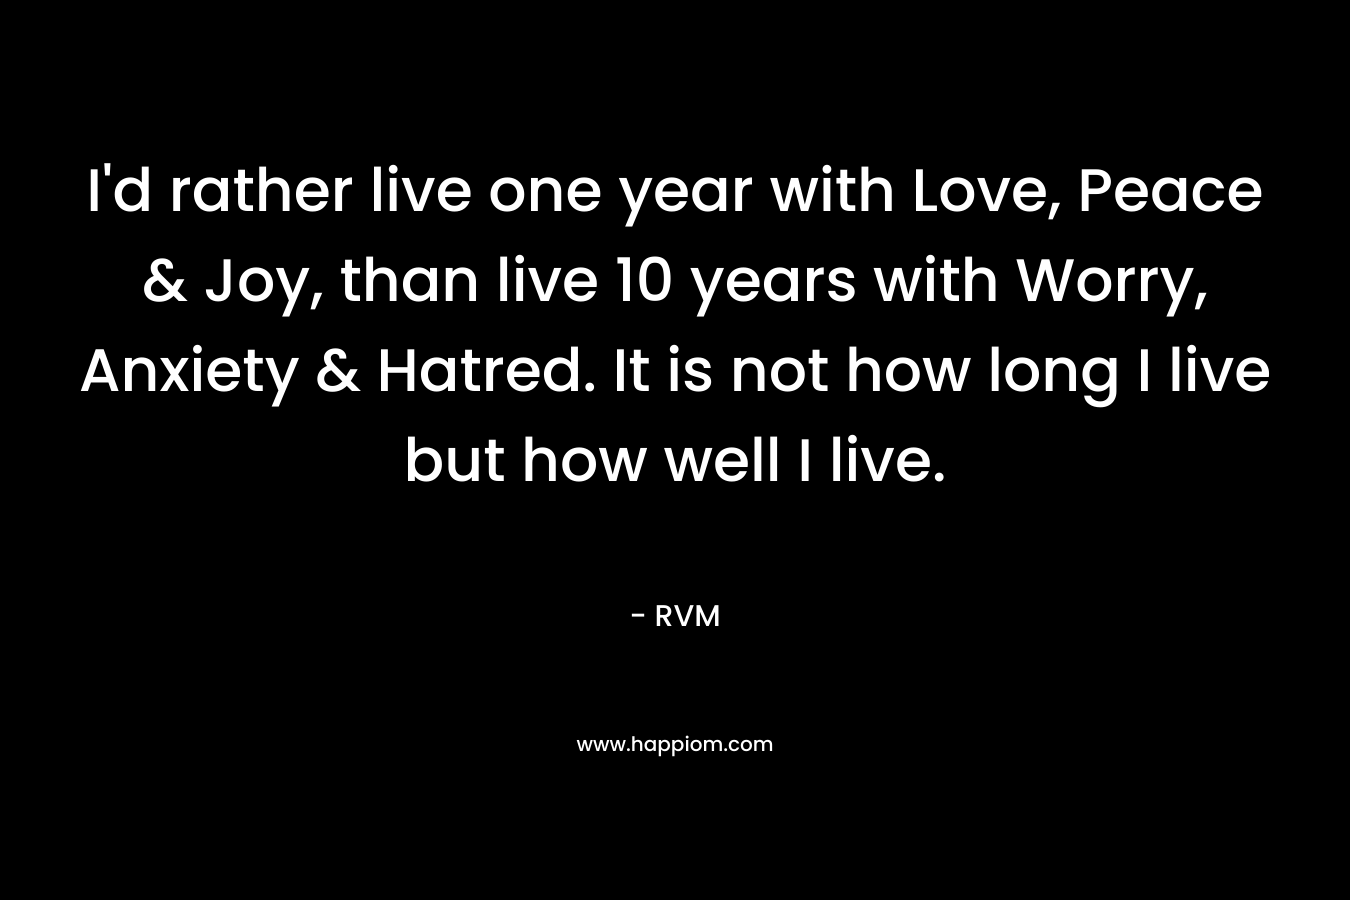 I'd rather live one year with Love, Peace & Joy, than live 10 years with Worry, Anxiety & Hatred. It is not how long I live but how well I live.